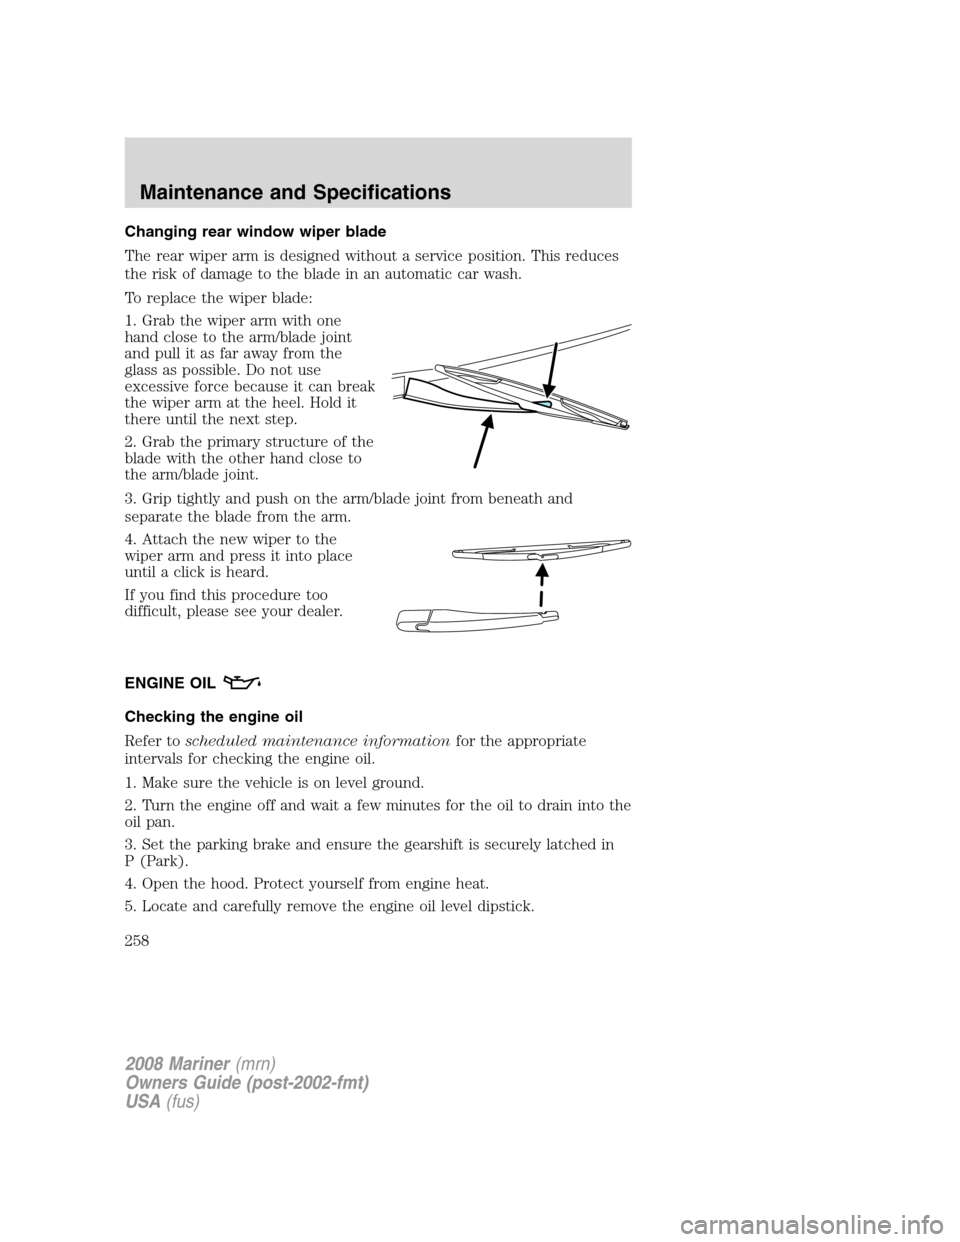 Mercury Mariner 2008  Owners Manuals Changing rear window wiper blade
The rear wiper arm is designed without a service position. This reduces
the risk of damage to the blade in an automatic car wash.
To replace the wiper blade:
1. Grab t